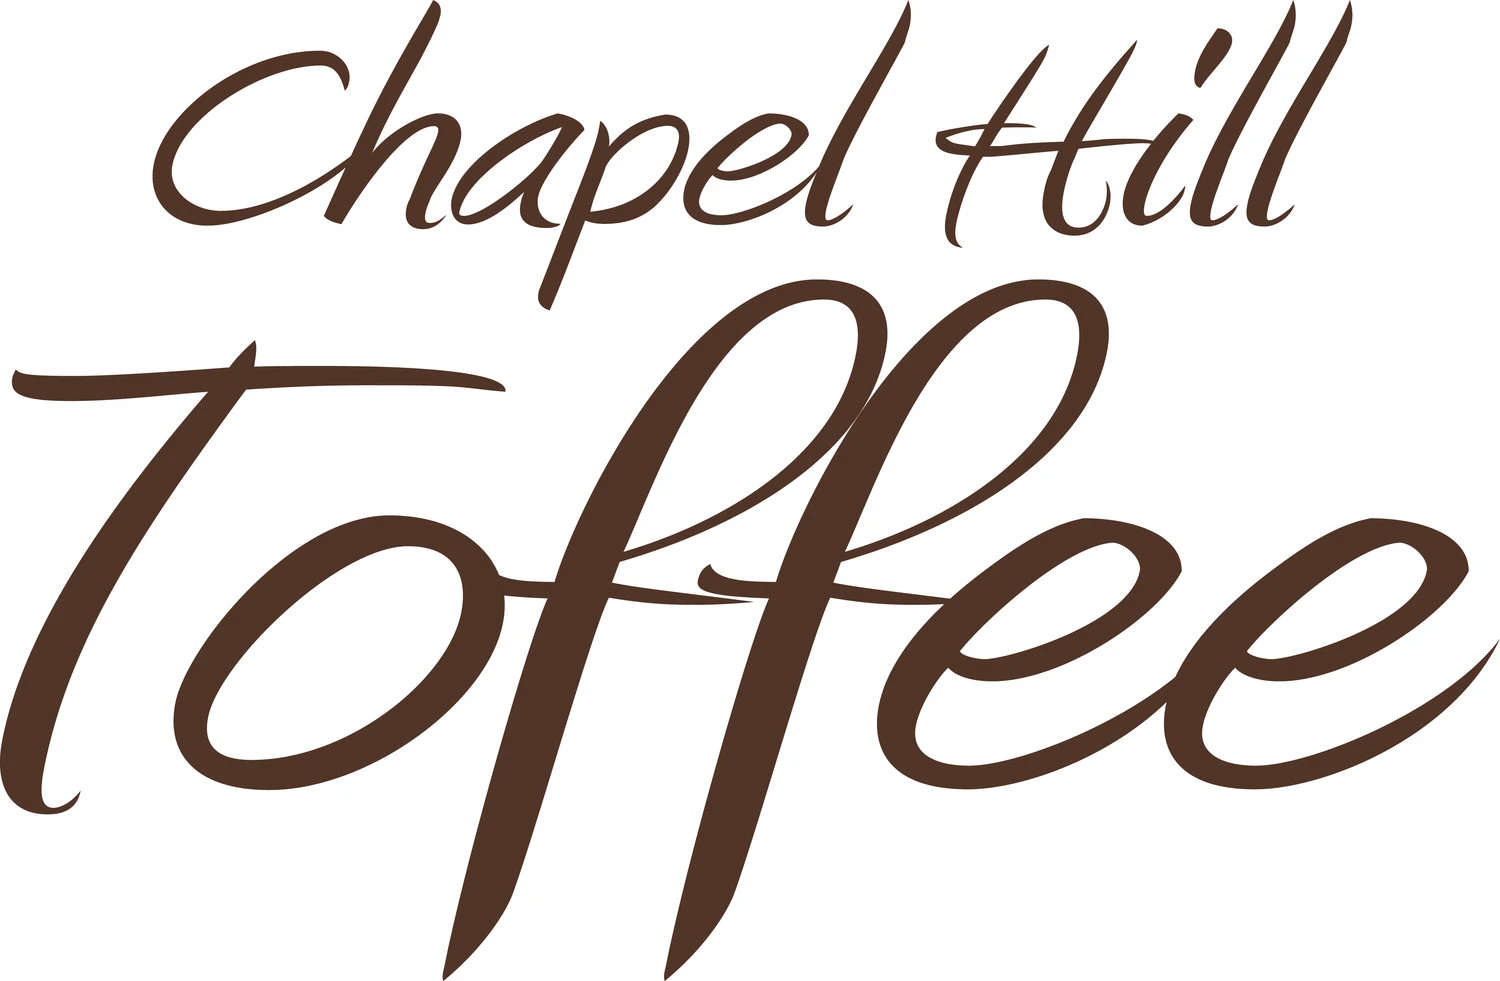 Chapel Hill Toffee